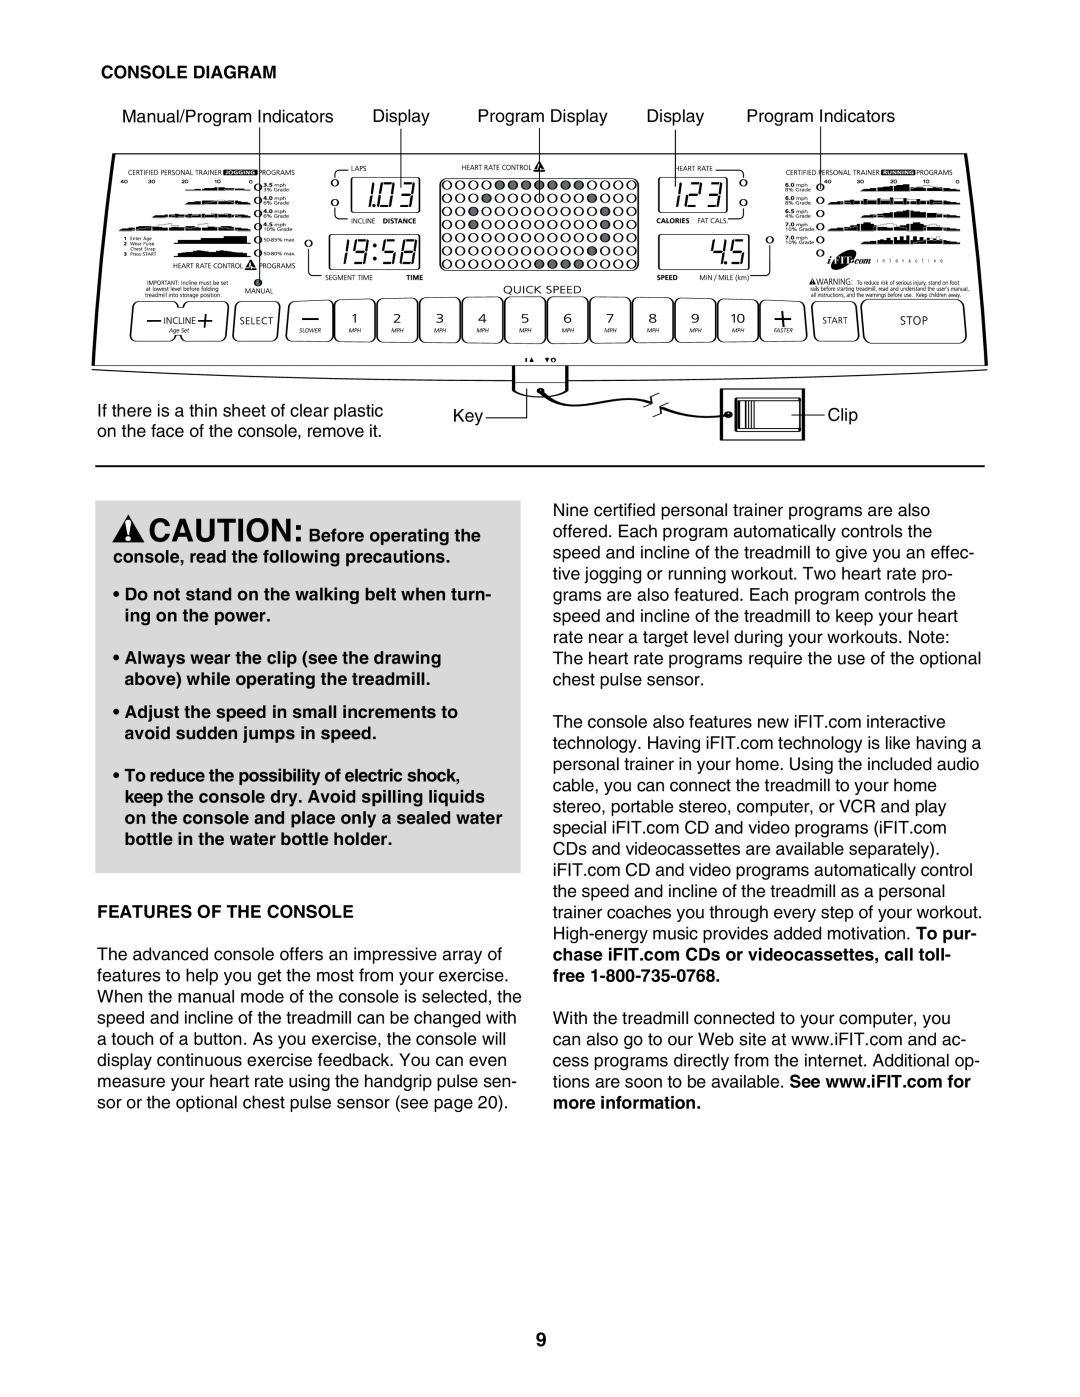 ProForm HGTL09111M, HGTL09111O Console Diagram, CAUTION Before operating the console, read the following precautions 